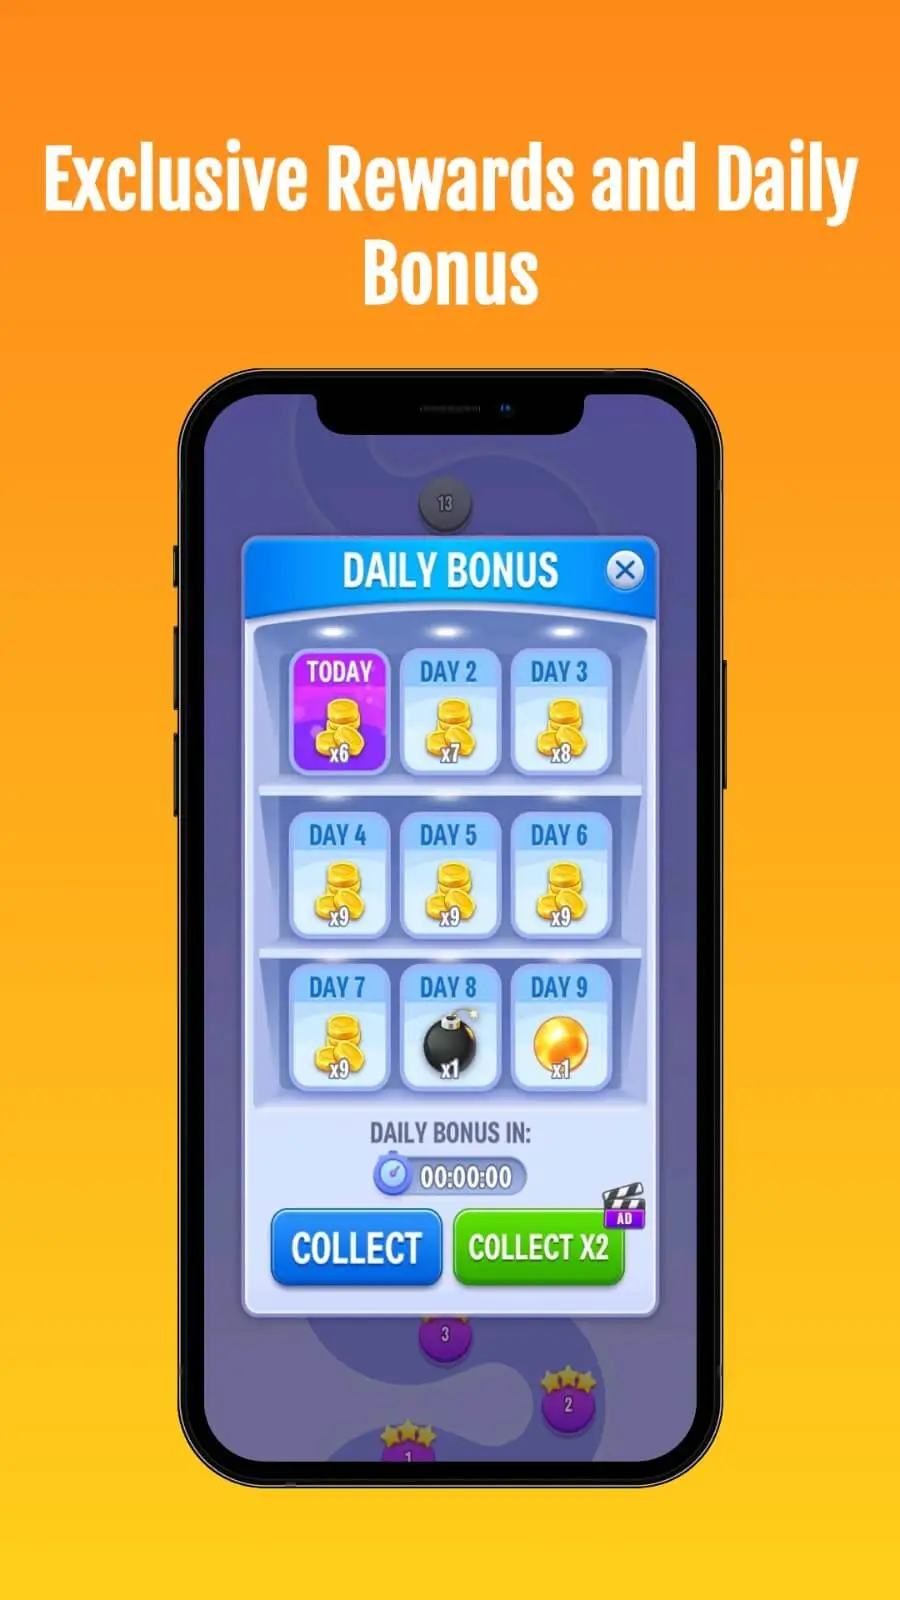 EXCLUSIVE REWARDS AND DAILY BONUSES